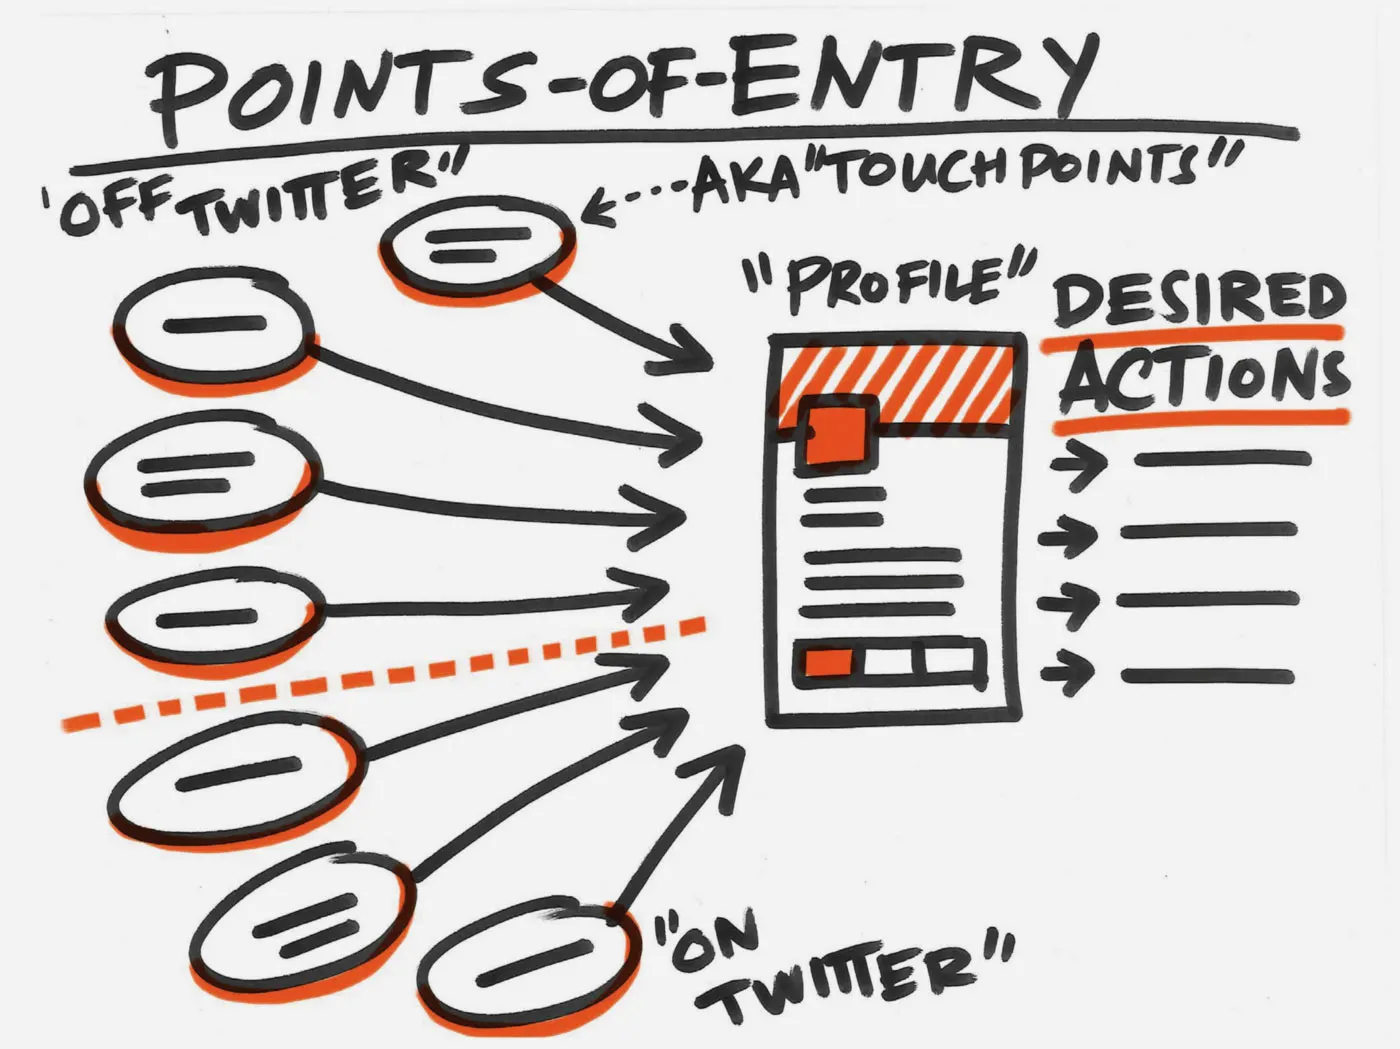 Black marker sketch with the heading "Points-of-Entry" and the subheads "On Twitter" and "Off Twitter" both pointing to "Desired actions."